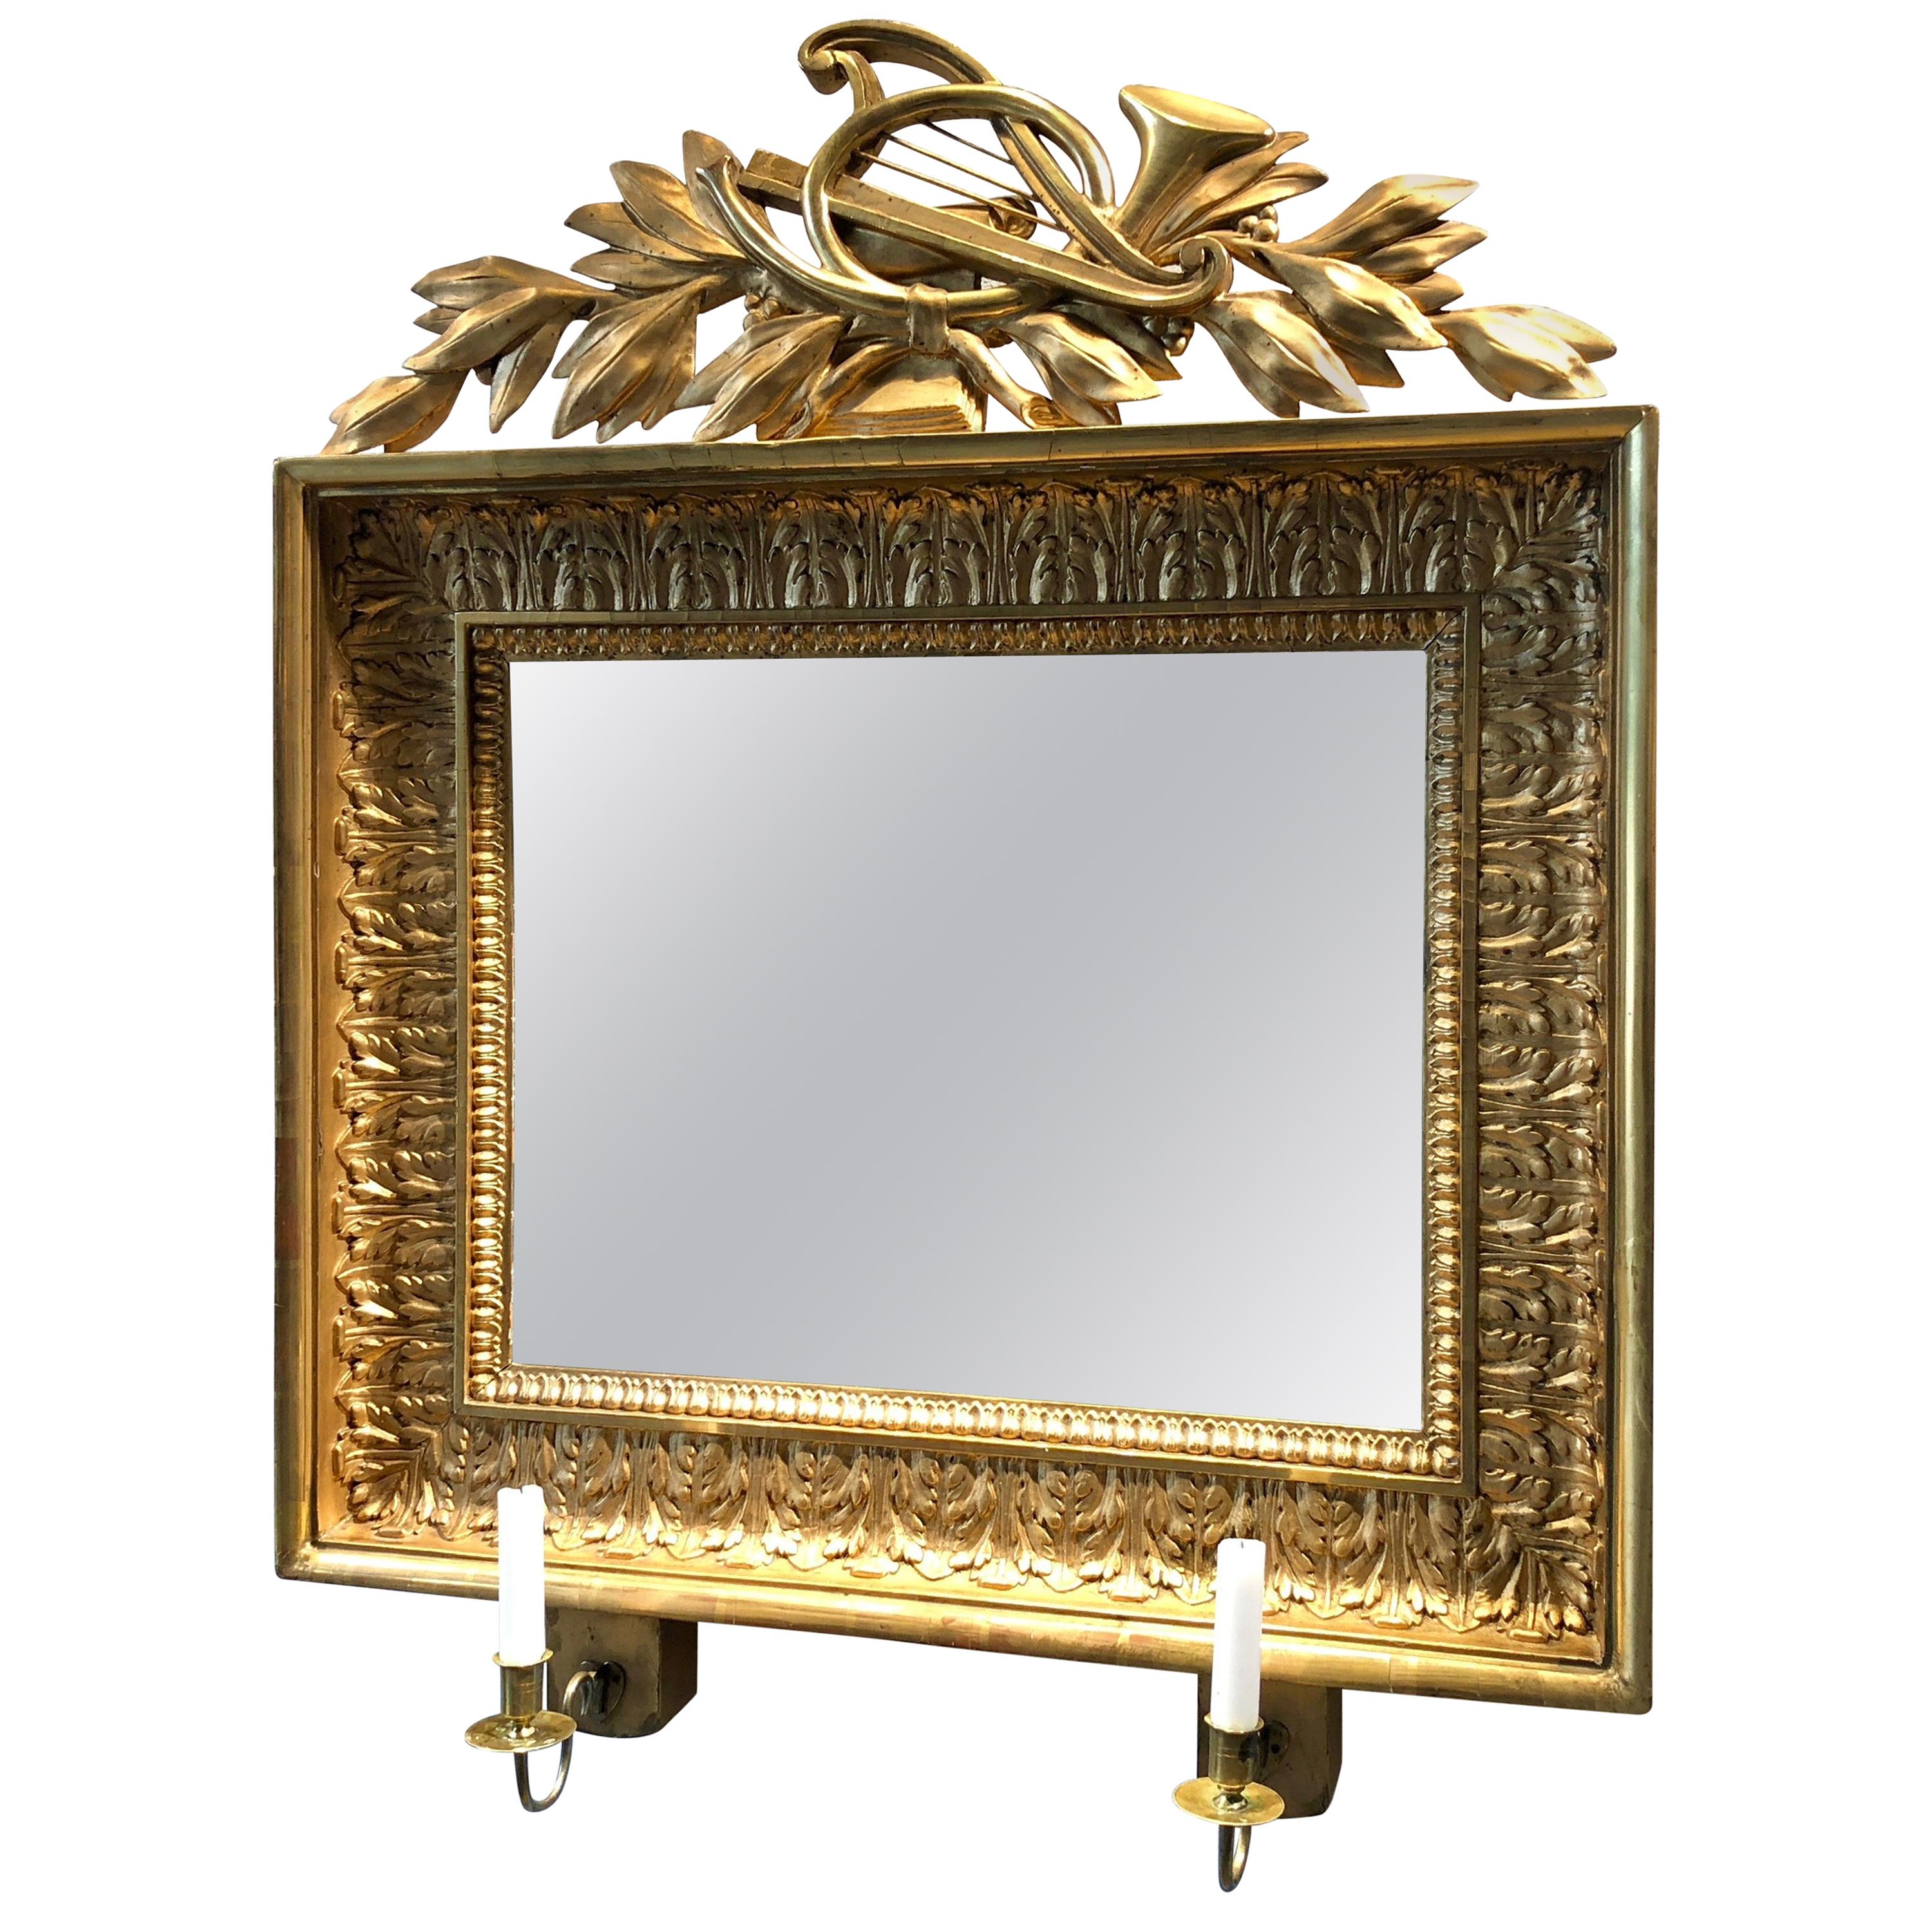 Swedish Empire Mirrored Wall Sconce with Gilded Frame and Carved Decorations For Sale